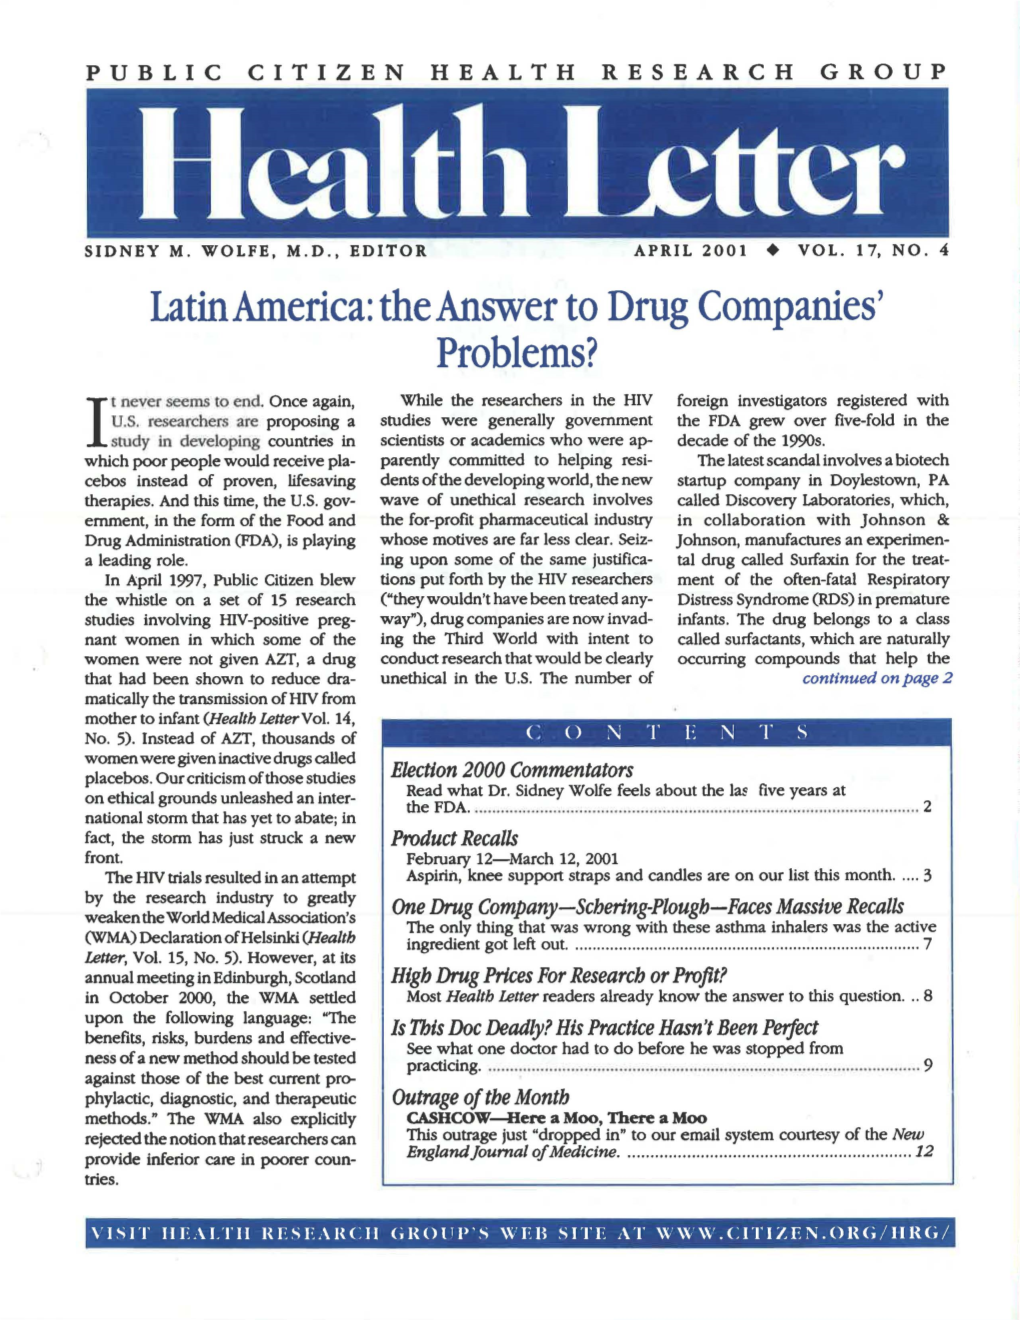 Latin America: the Answer to Drug Companies' Problems?